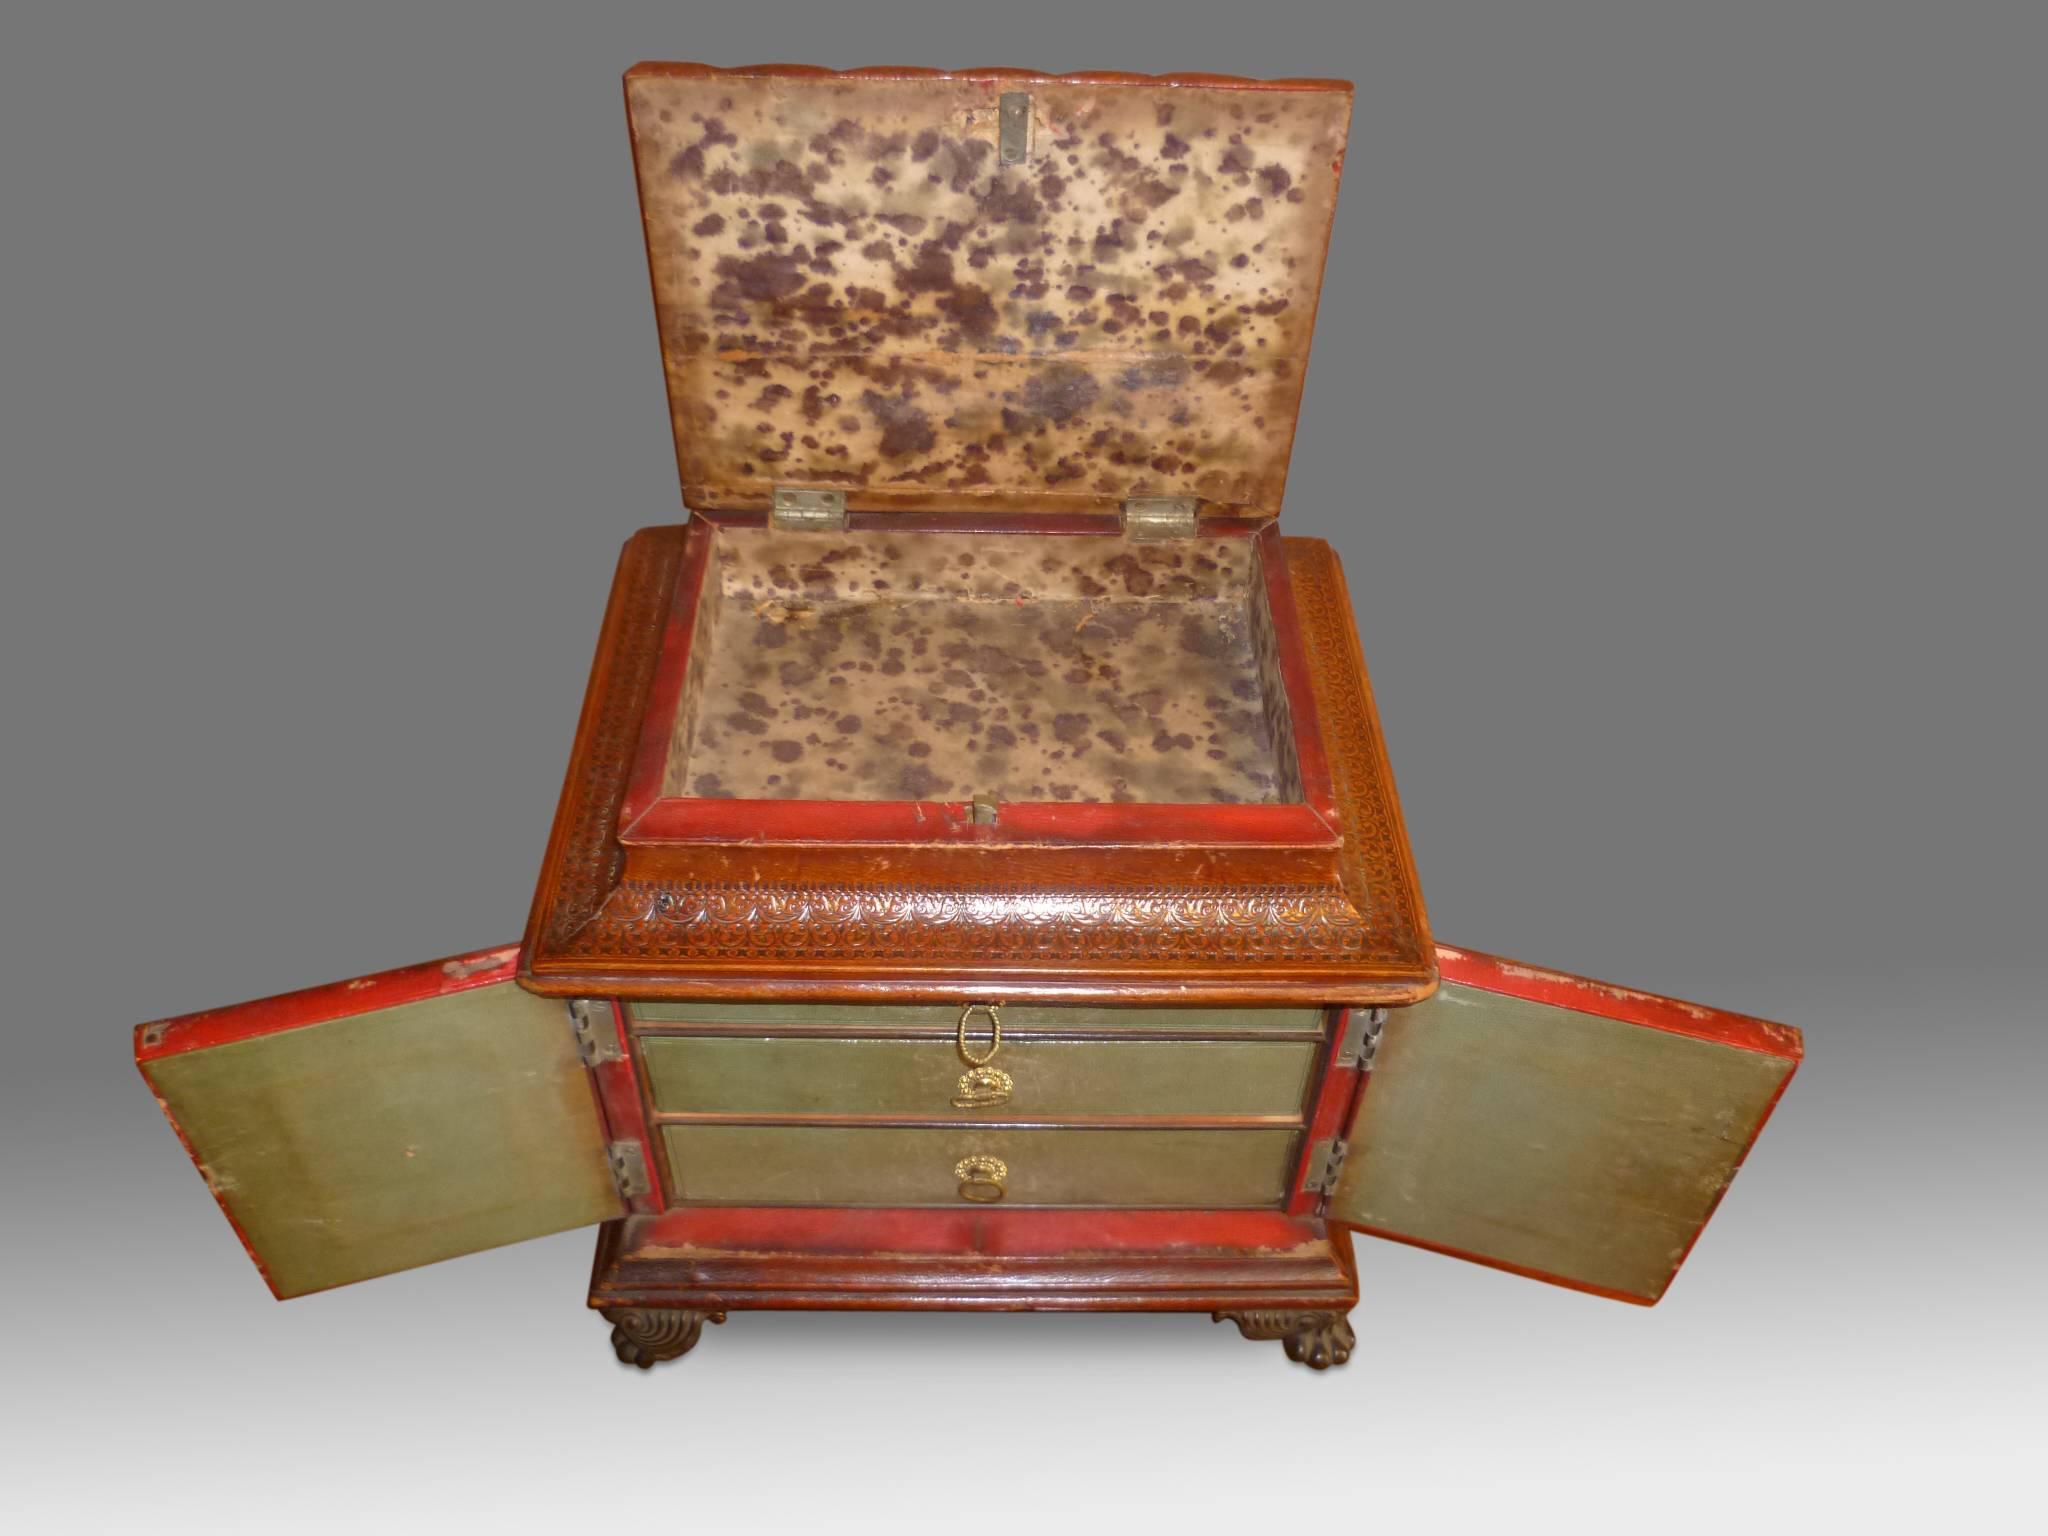 Regency Leather Covered Sewing Box In Good Condition For Sale In Folkestone, Kent